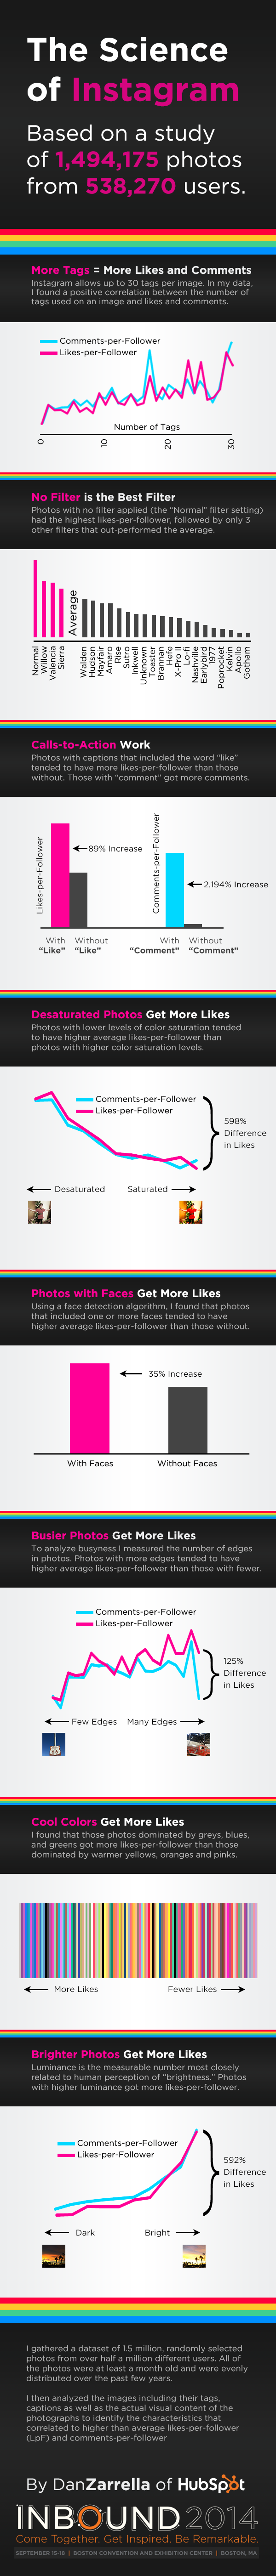 how-to-get-more-likes-and-followers-on-instagram